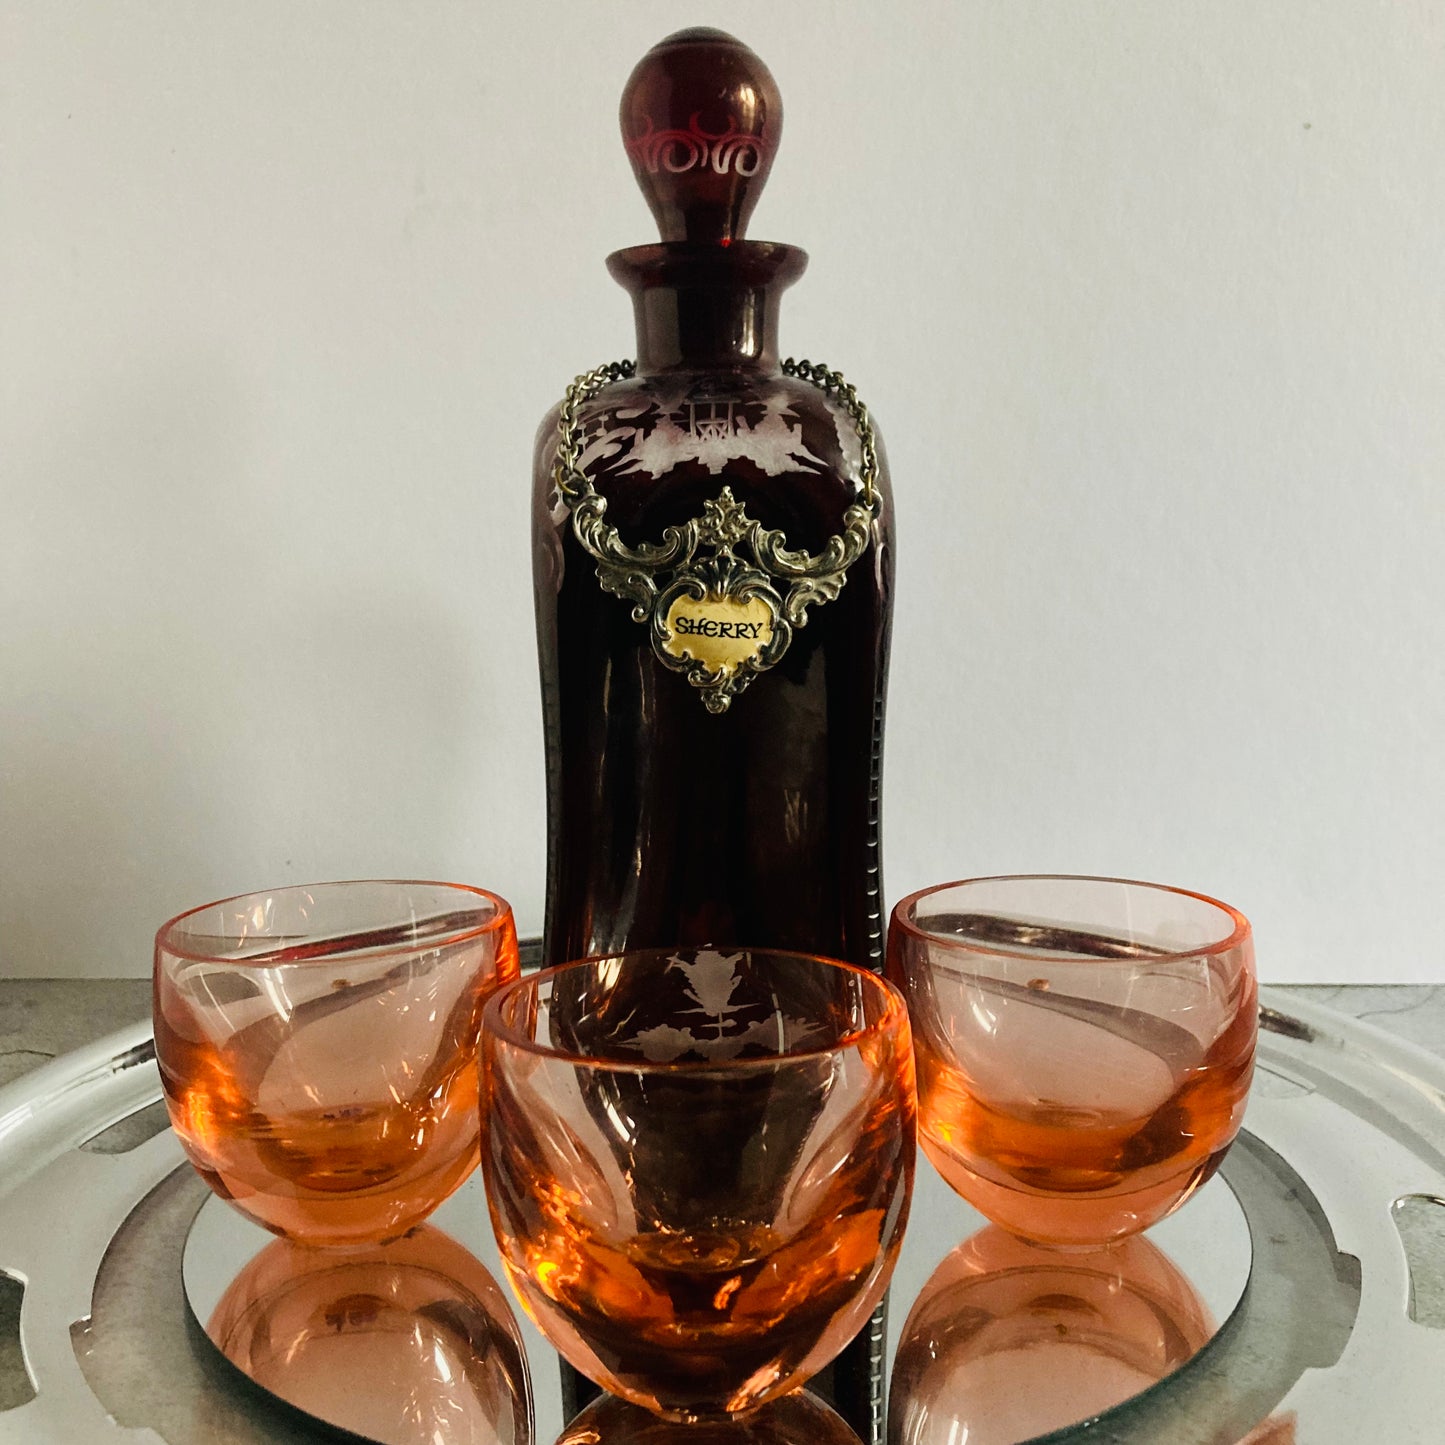 The Artist Yasmin - Vintage Red Glass Decanter